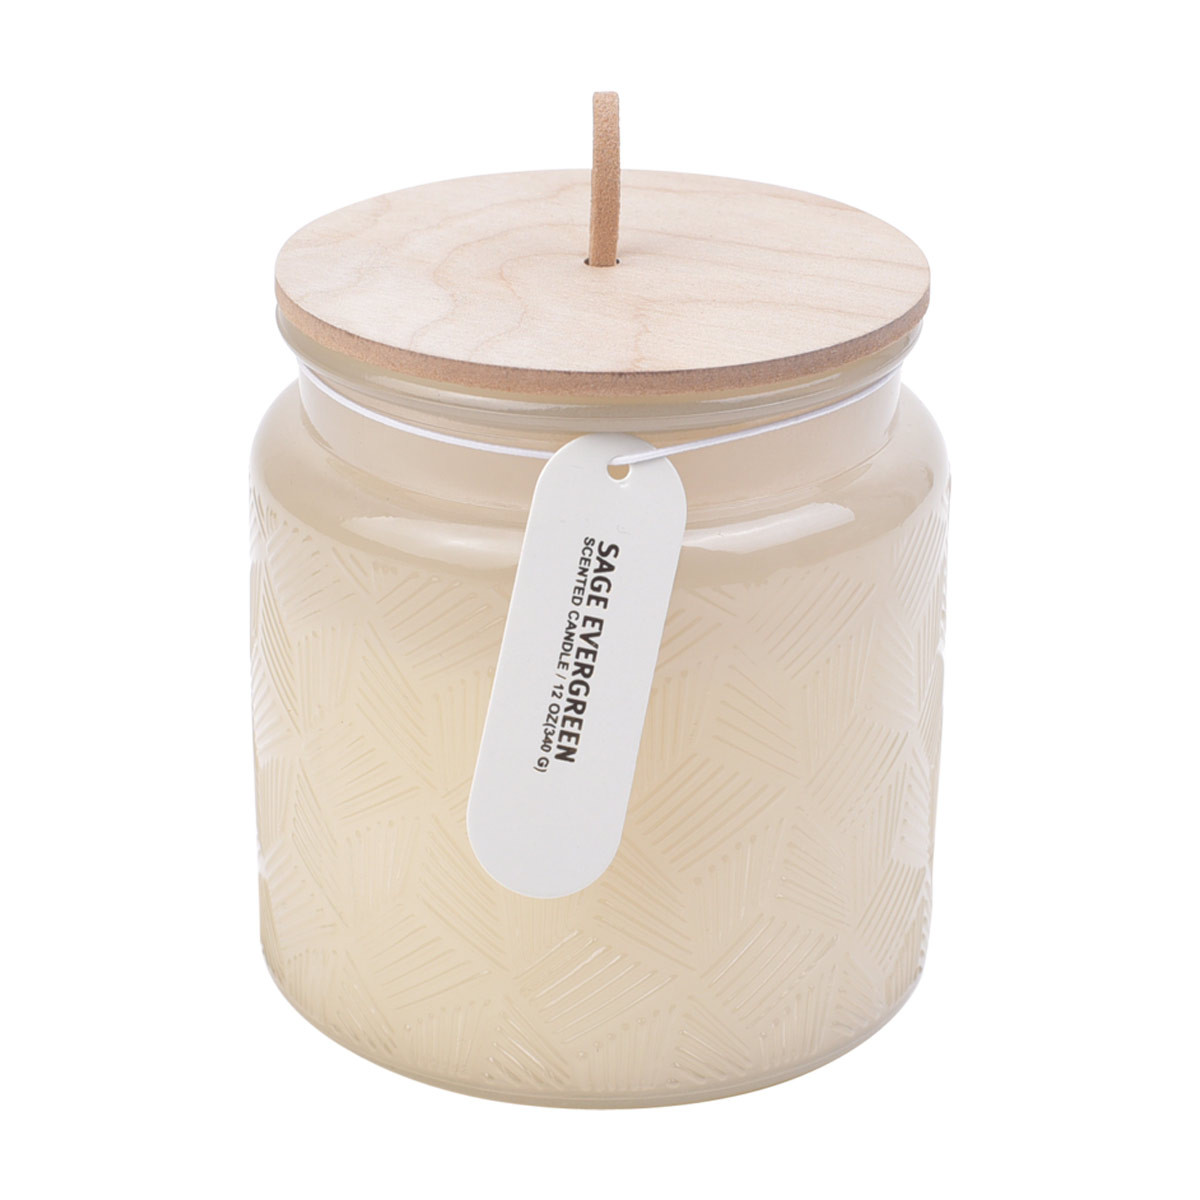 Sage Evergreen Scented Jar Candle with Wooden Lid, 12 oz